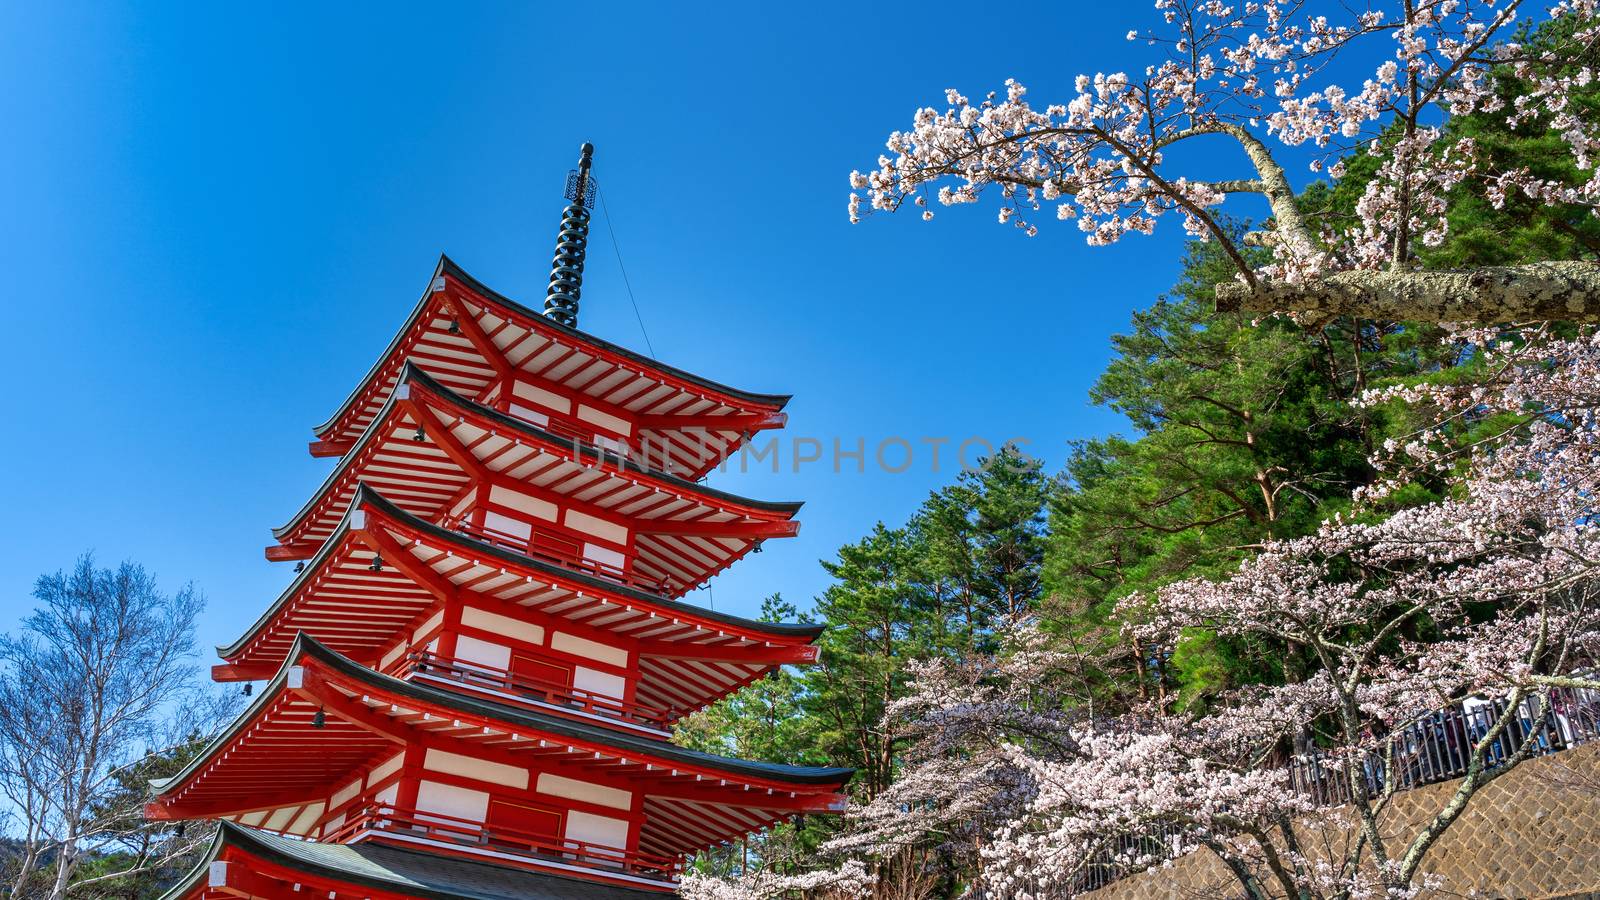 Red pagoda and cherry blossoms in spring, Japan. by gutarphotoghaphy